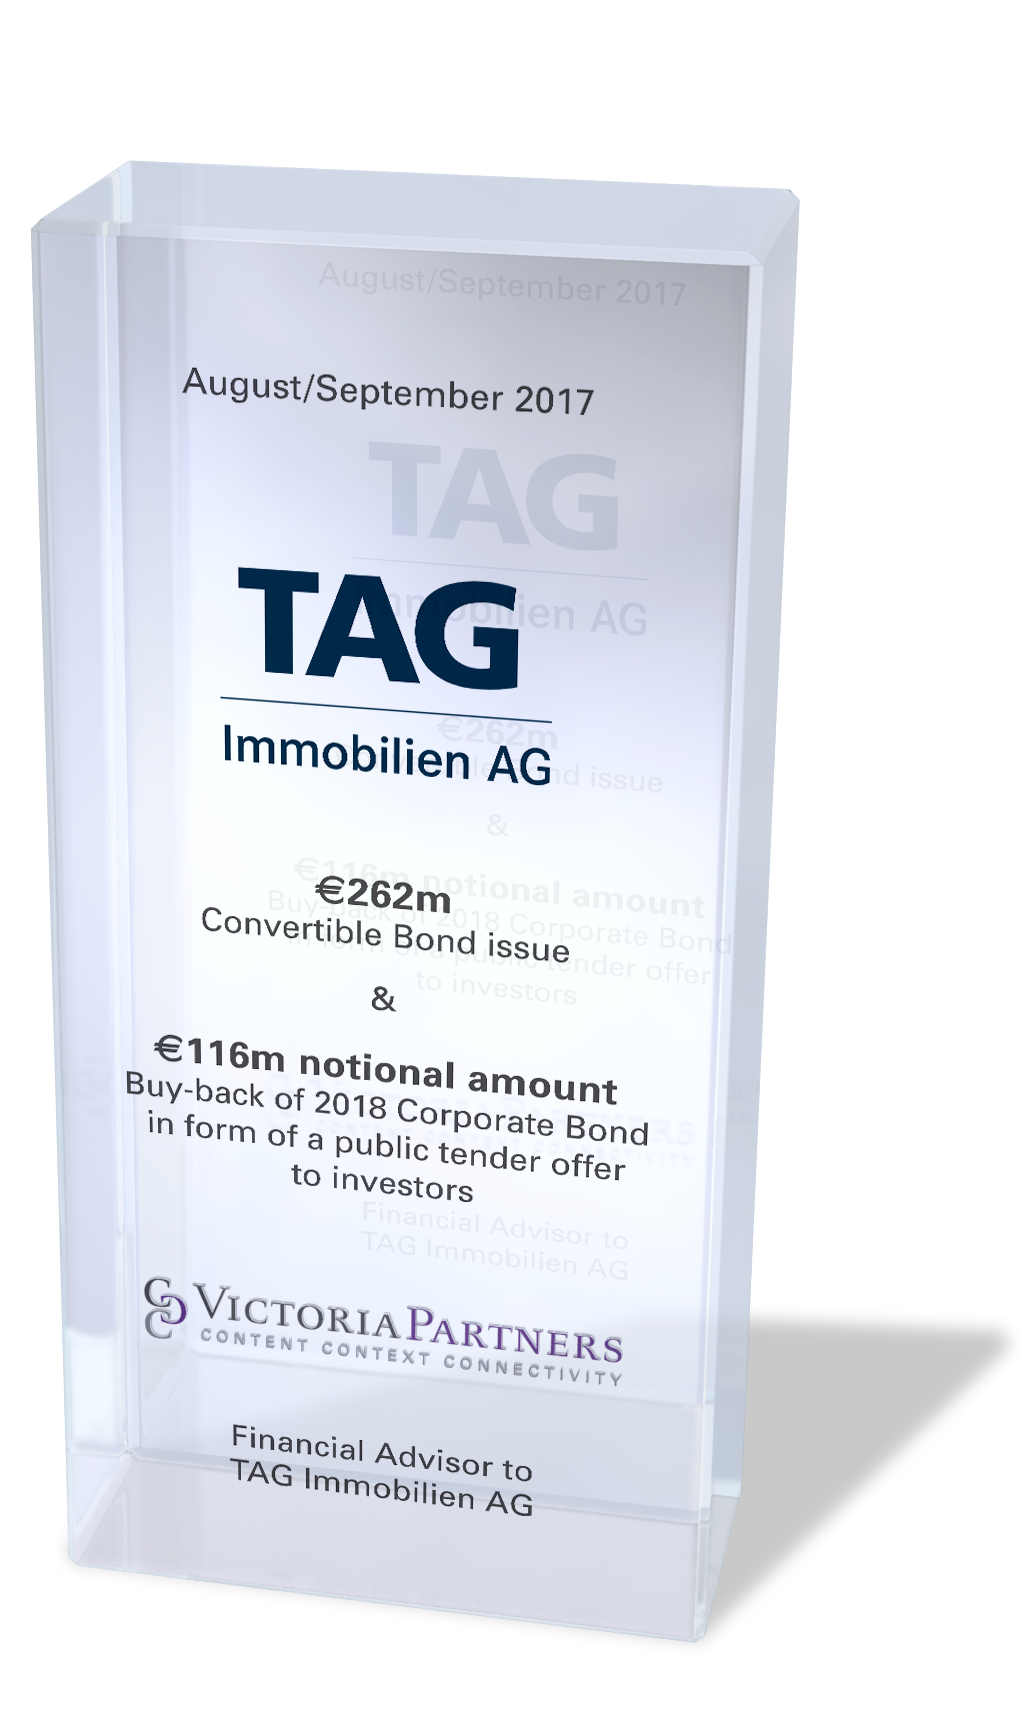 VICTORIAPARTNERS - Financial Advisor to TAG Immobilien AG - August/September 2017